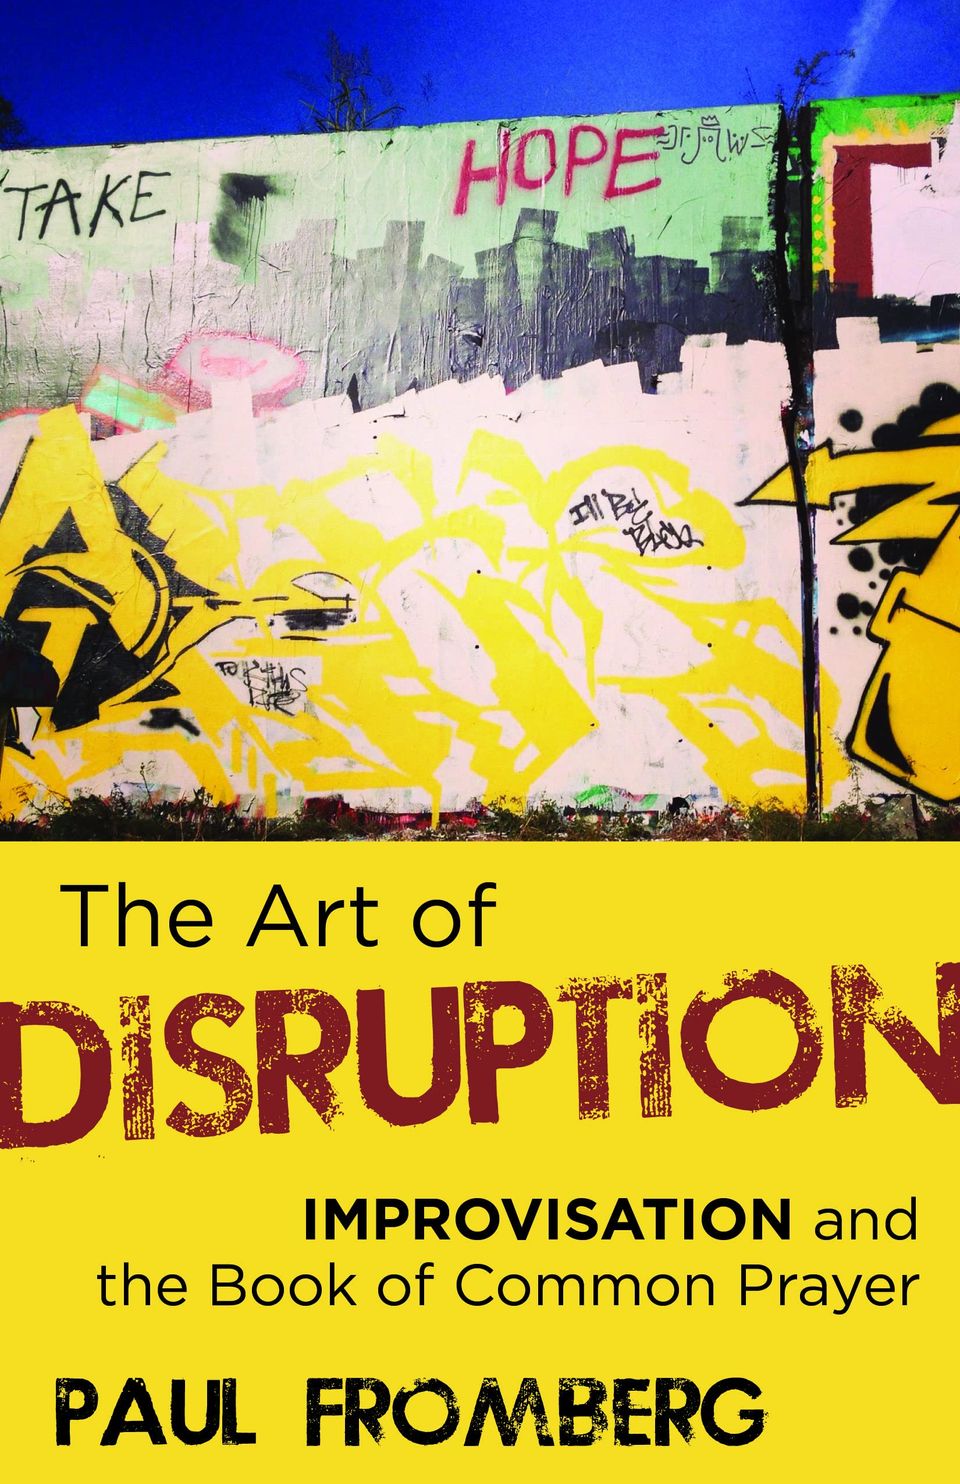 The cover of "The Art of Disruption" book featuring urban graffiti above the title.